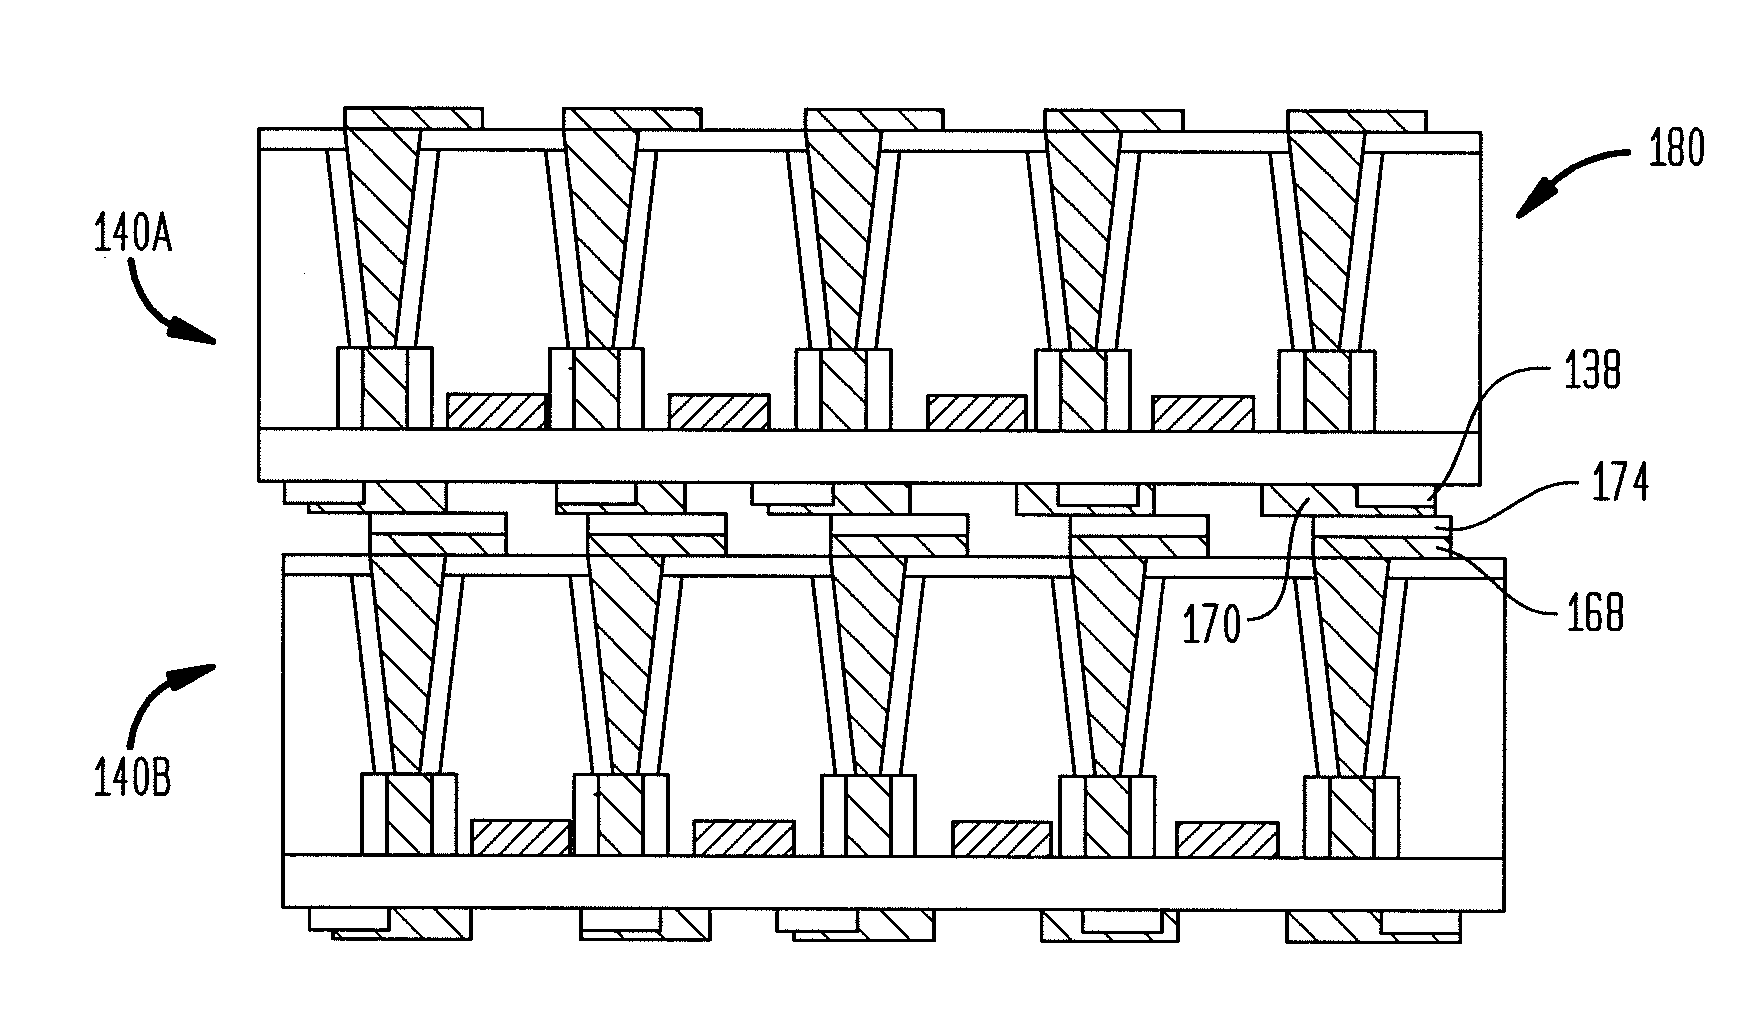 Microelectronic elements with rear contacts connected with via first or via middle structures